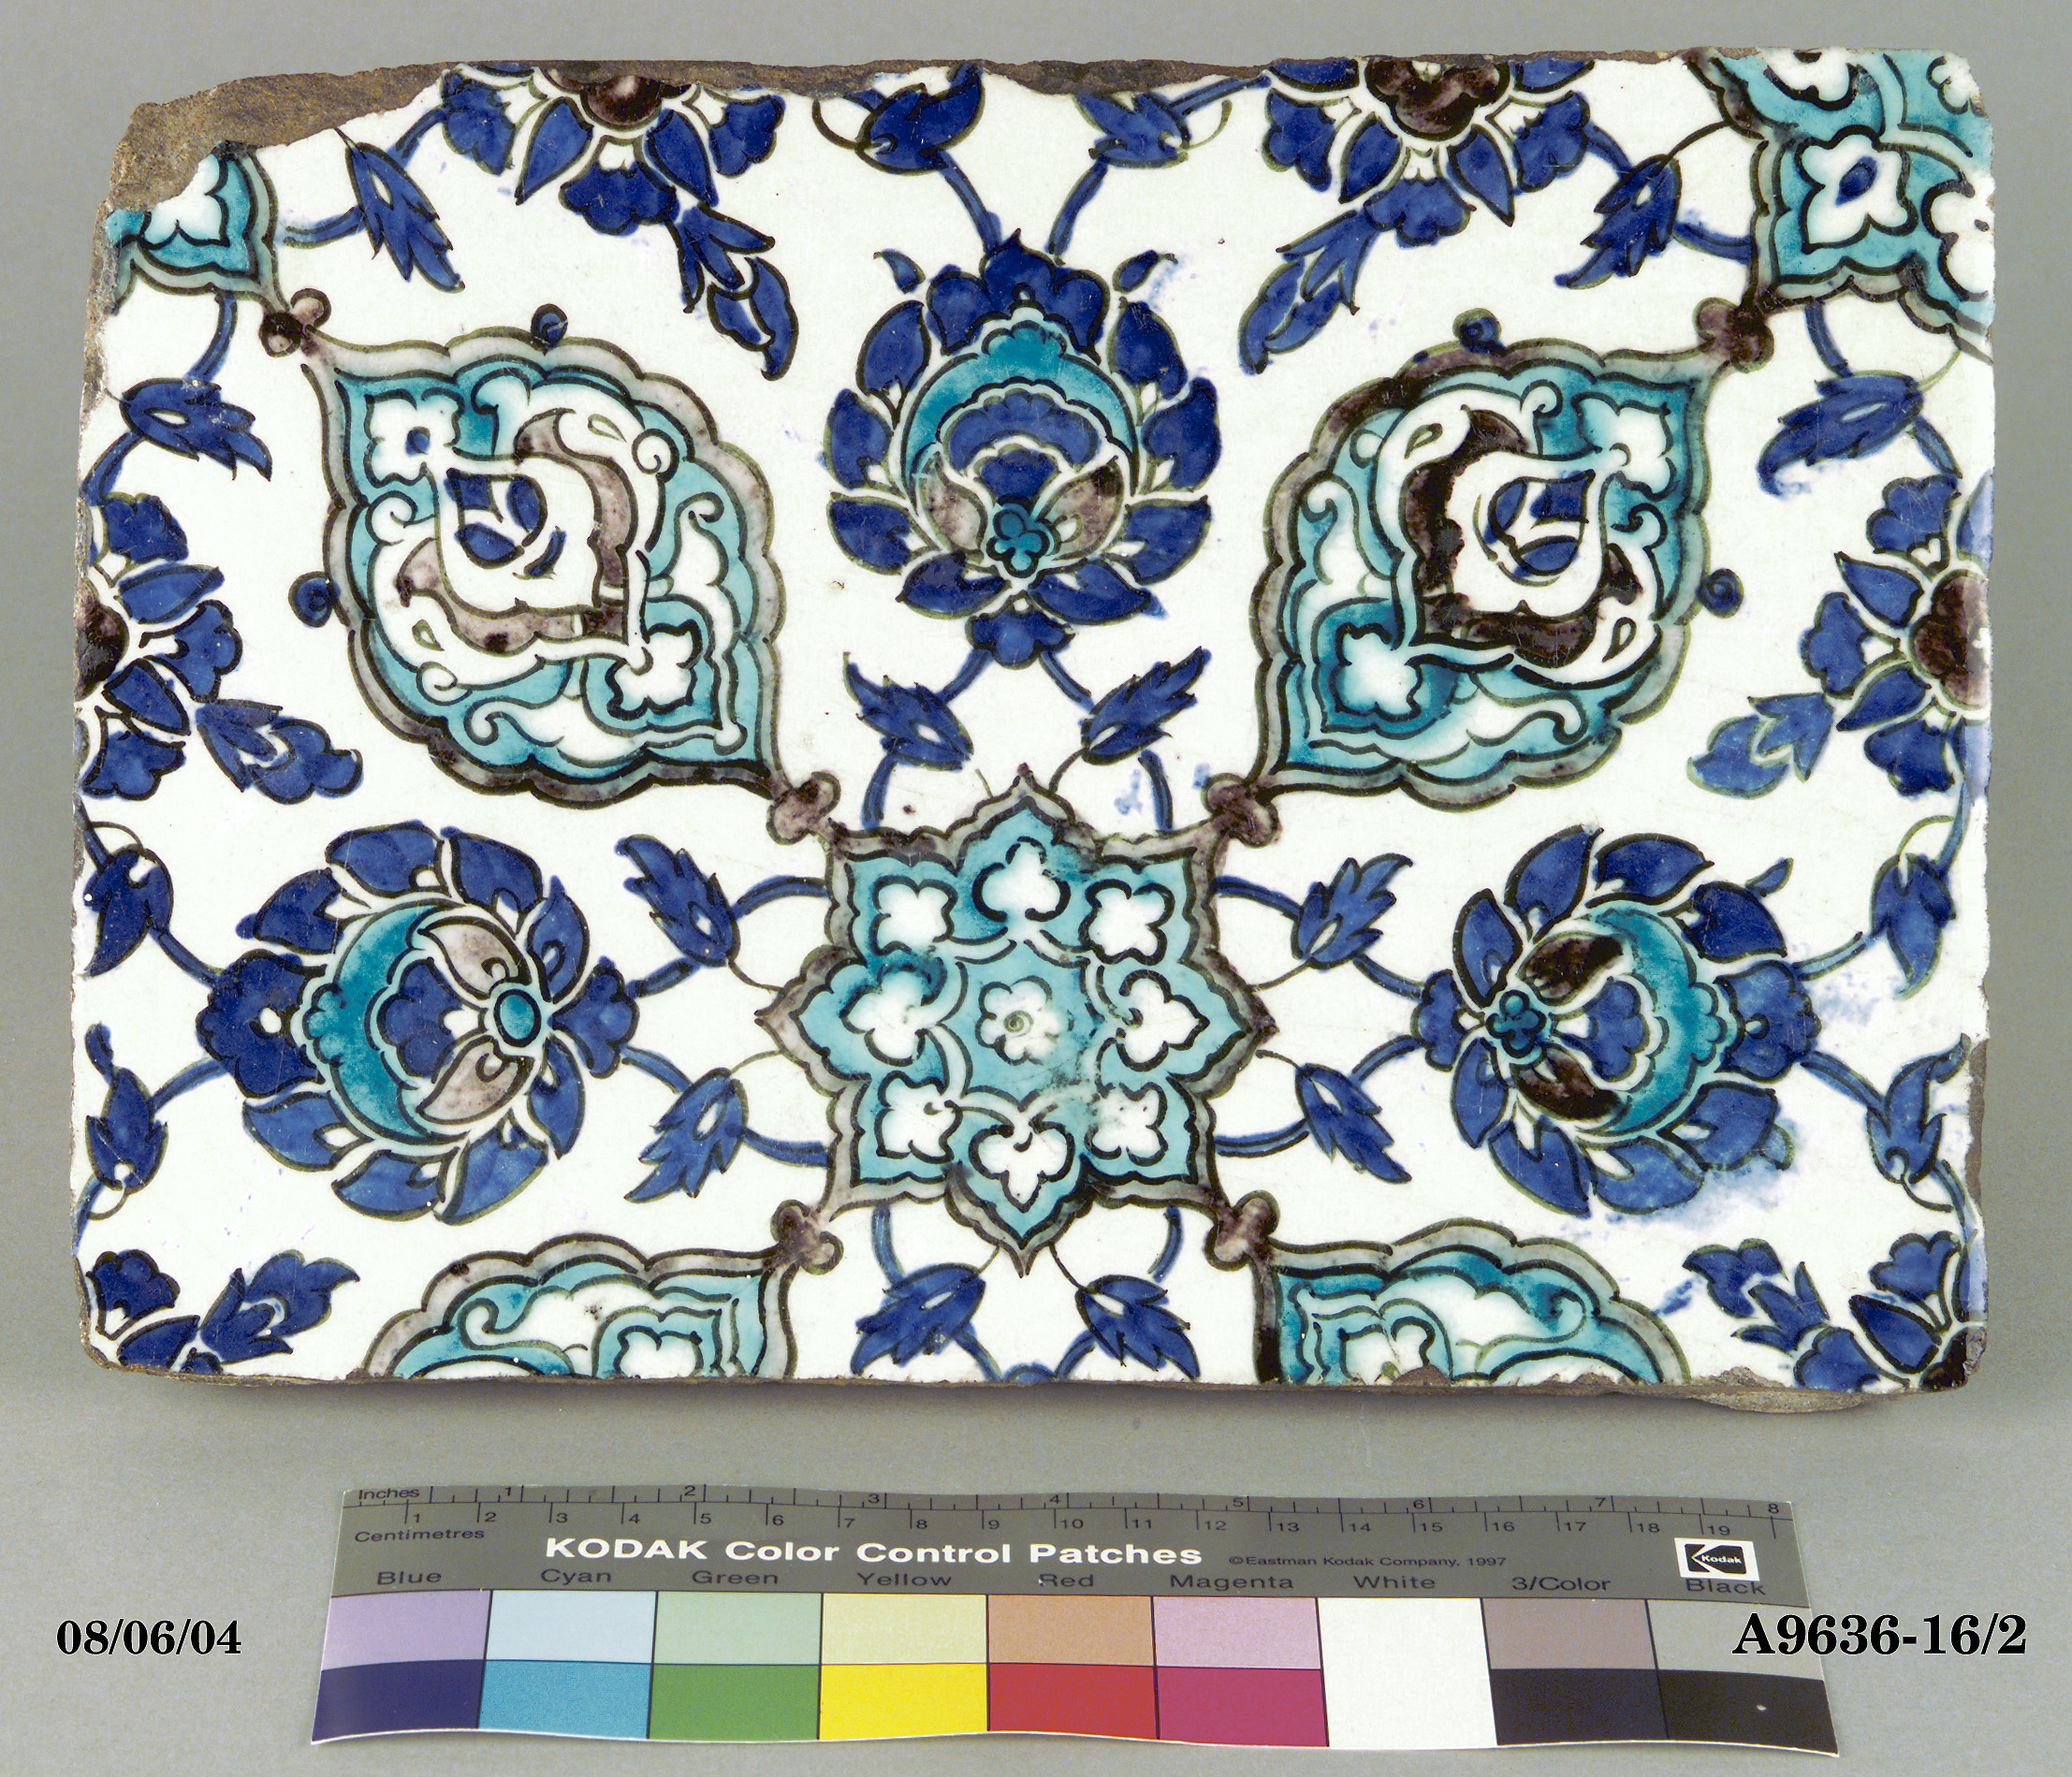 A pair of earthenware tiles from Damascus, Syria